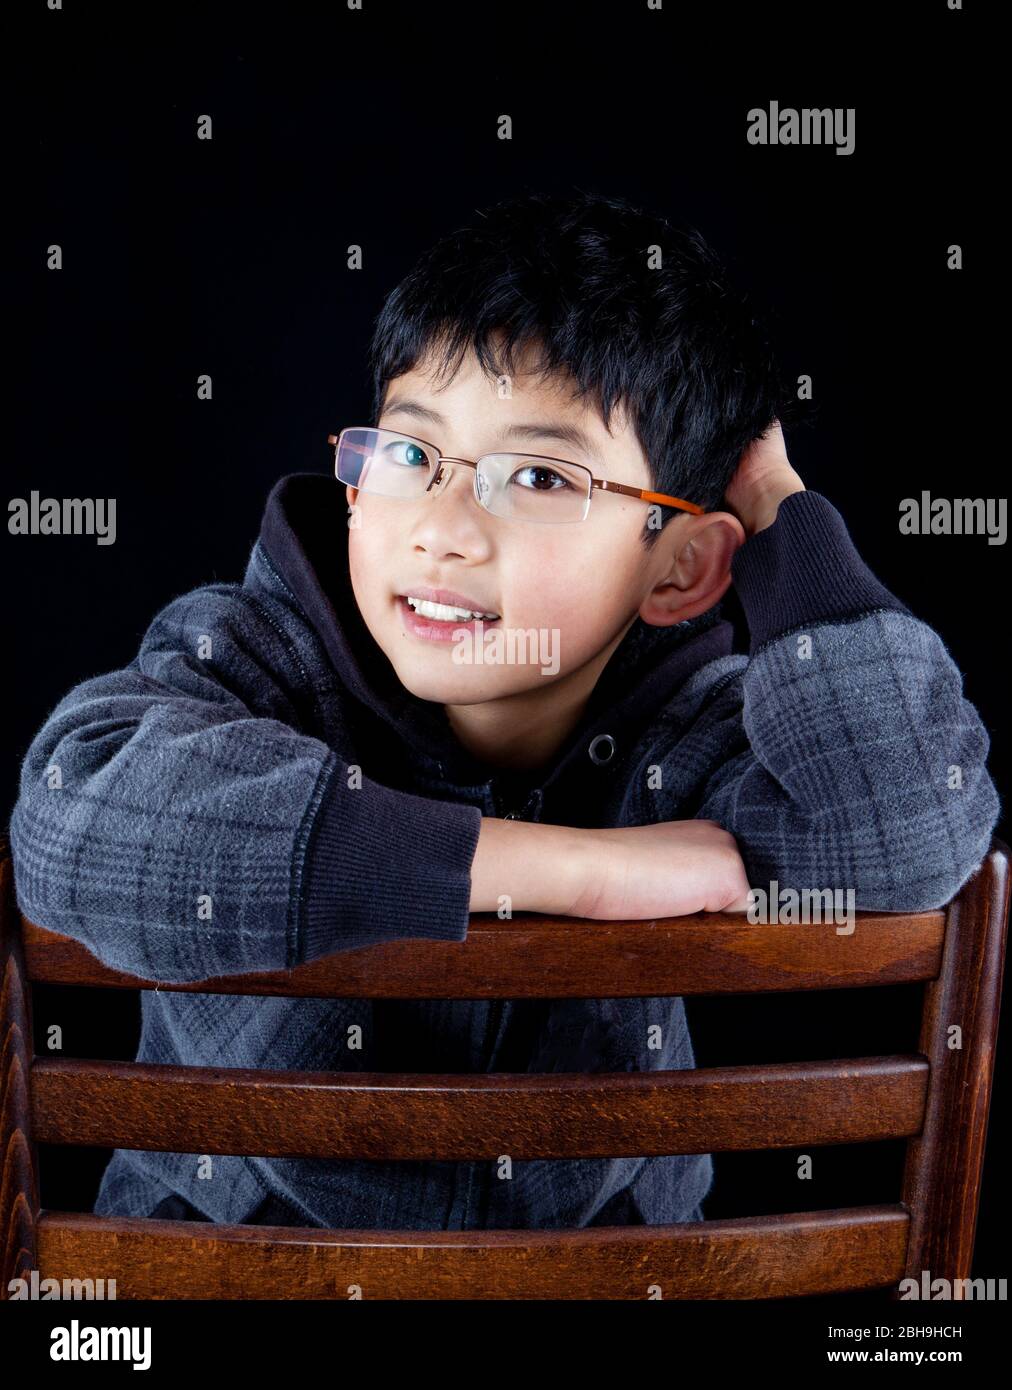 Handsome Asian Chinese boy posing in black hoodie sweater on the back of a chair in studio, isolated on black background. Stock Photo